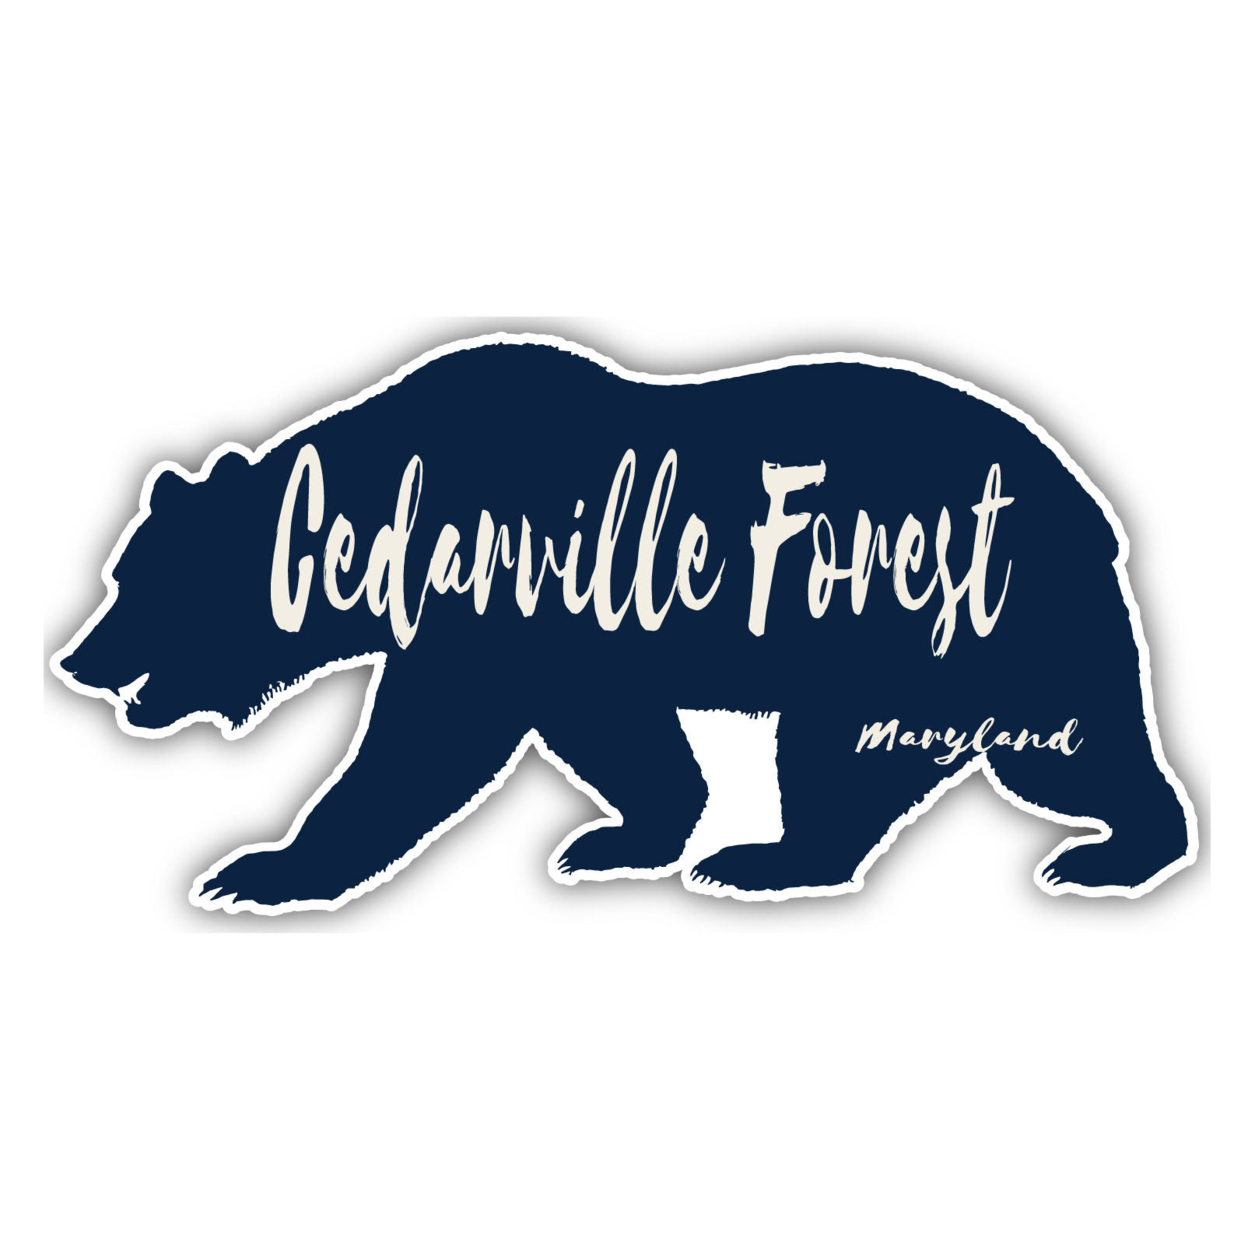 Cedarville Forest Maryland Souvenir Decorative Stickers (Choose Theme And Size) - Single Unit, 8-Inch, Bear